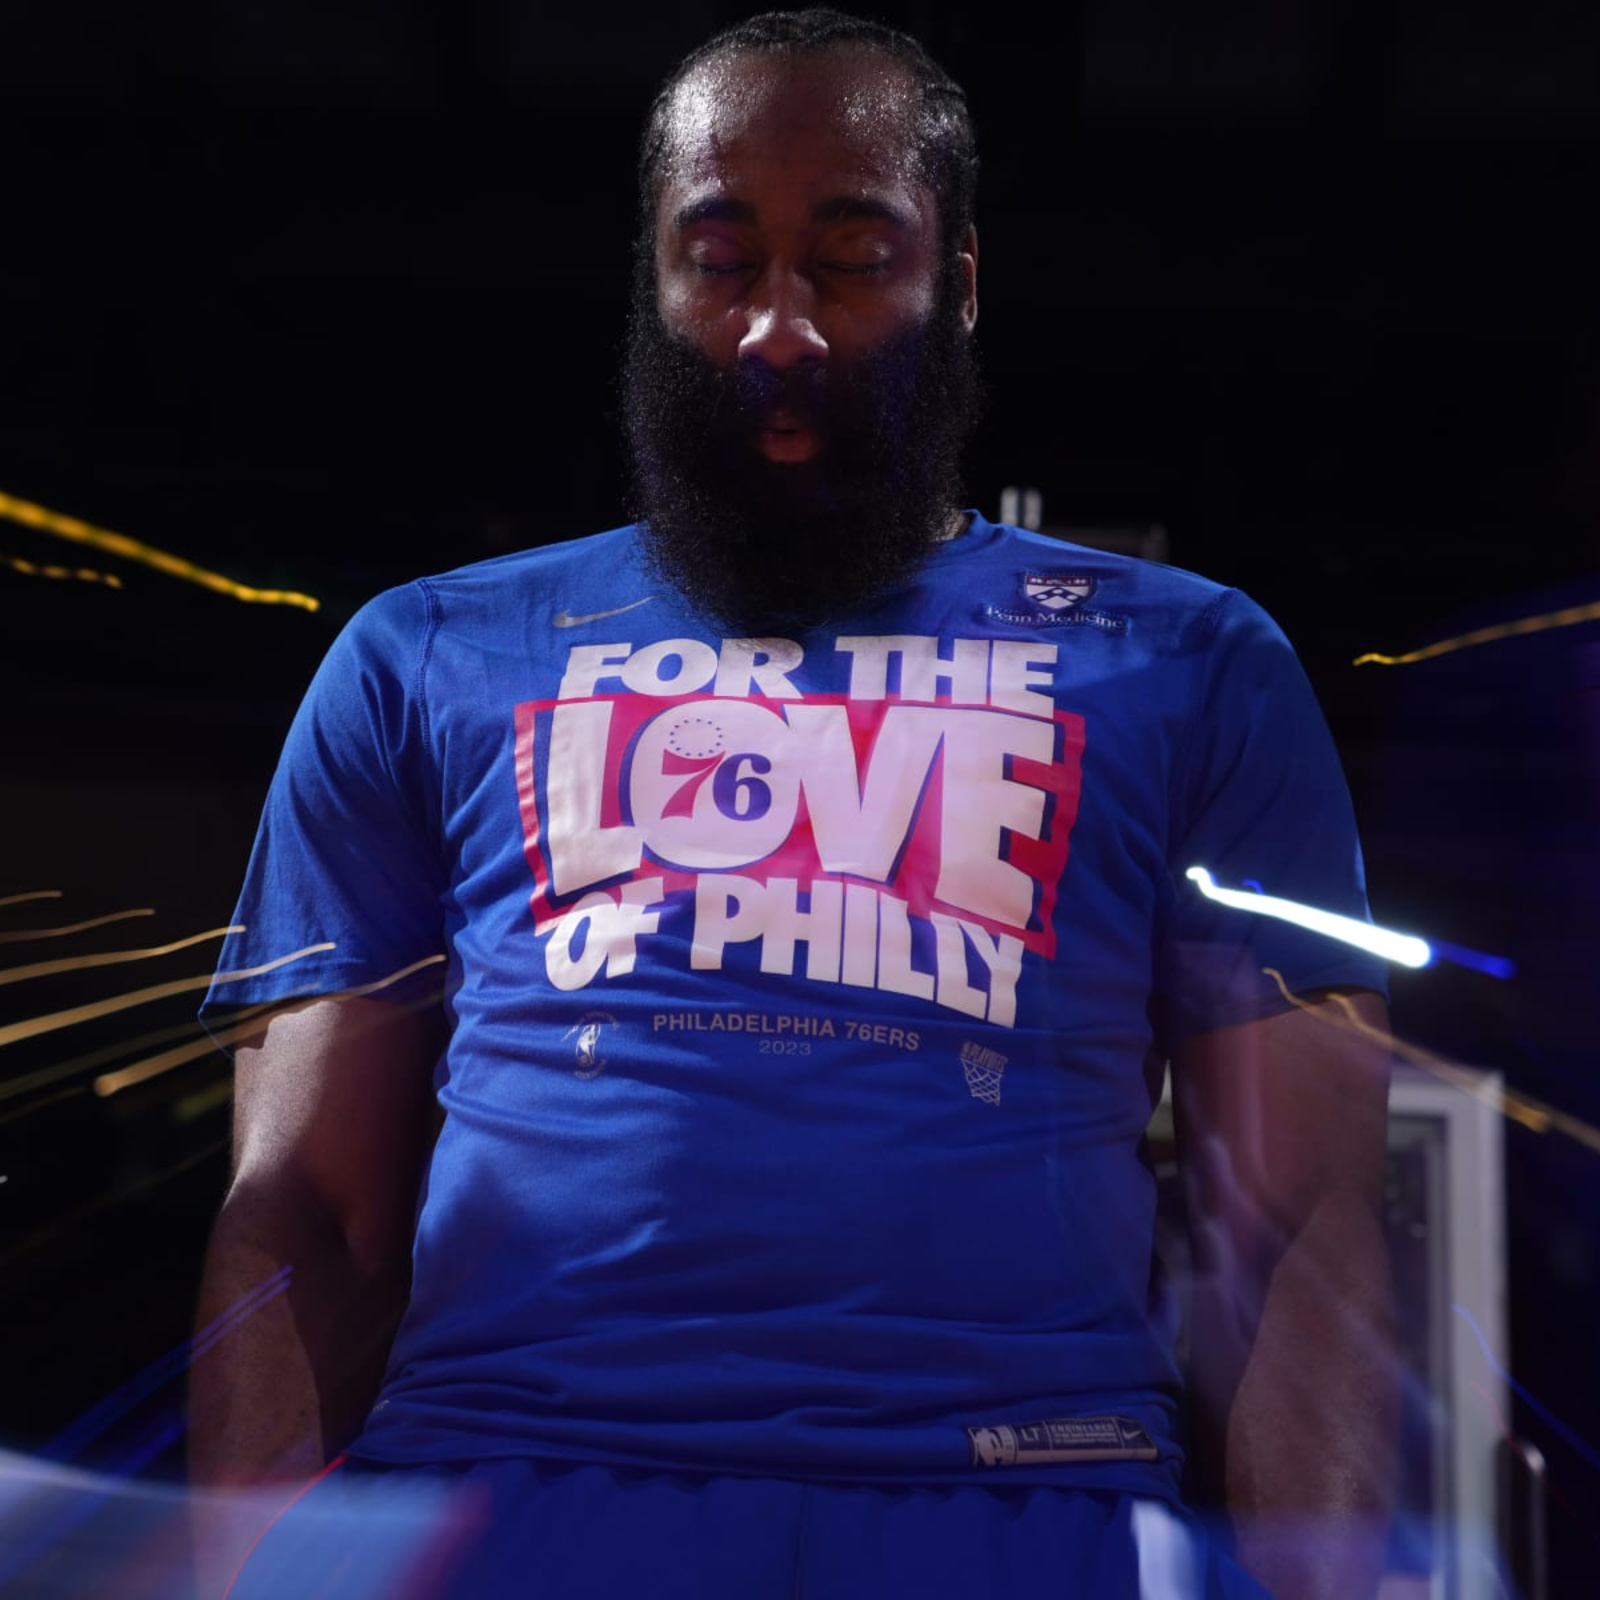 Joel Embiid, James Harden have message for Sixers amid trade deadline